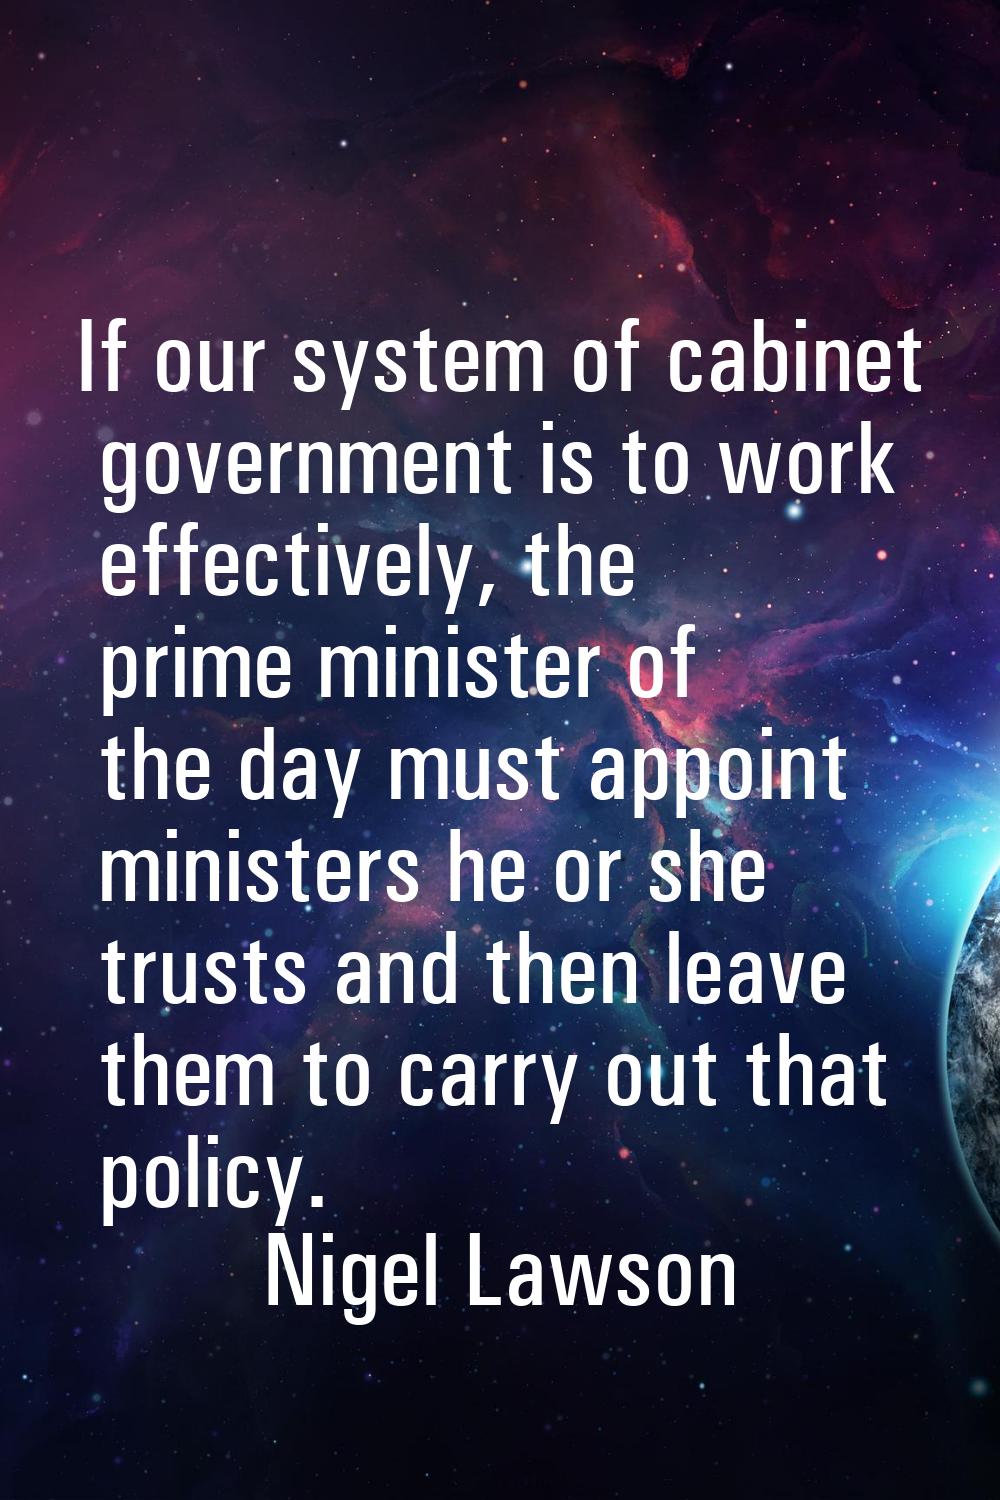 If our system of cabinet government is to work effectively, the prime minister of the day must appo